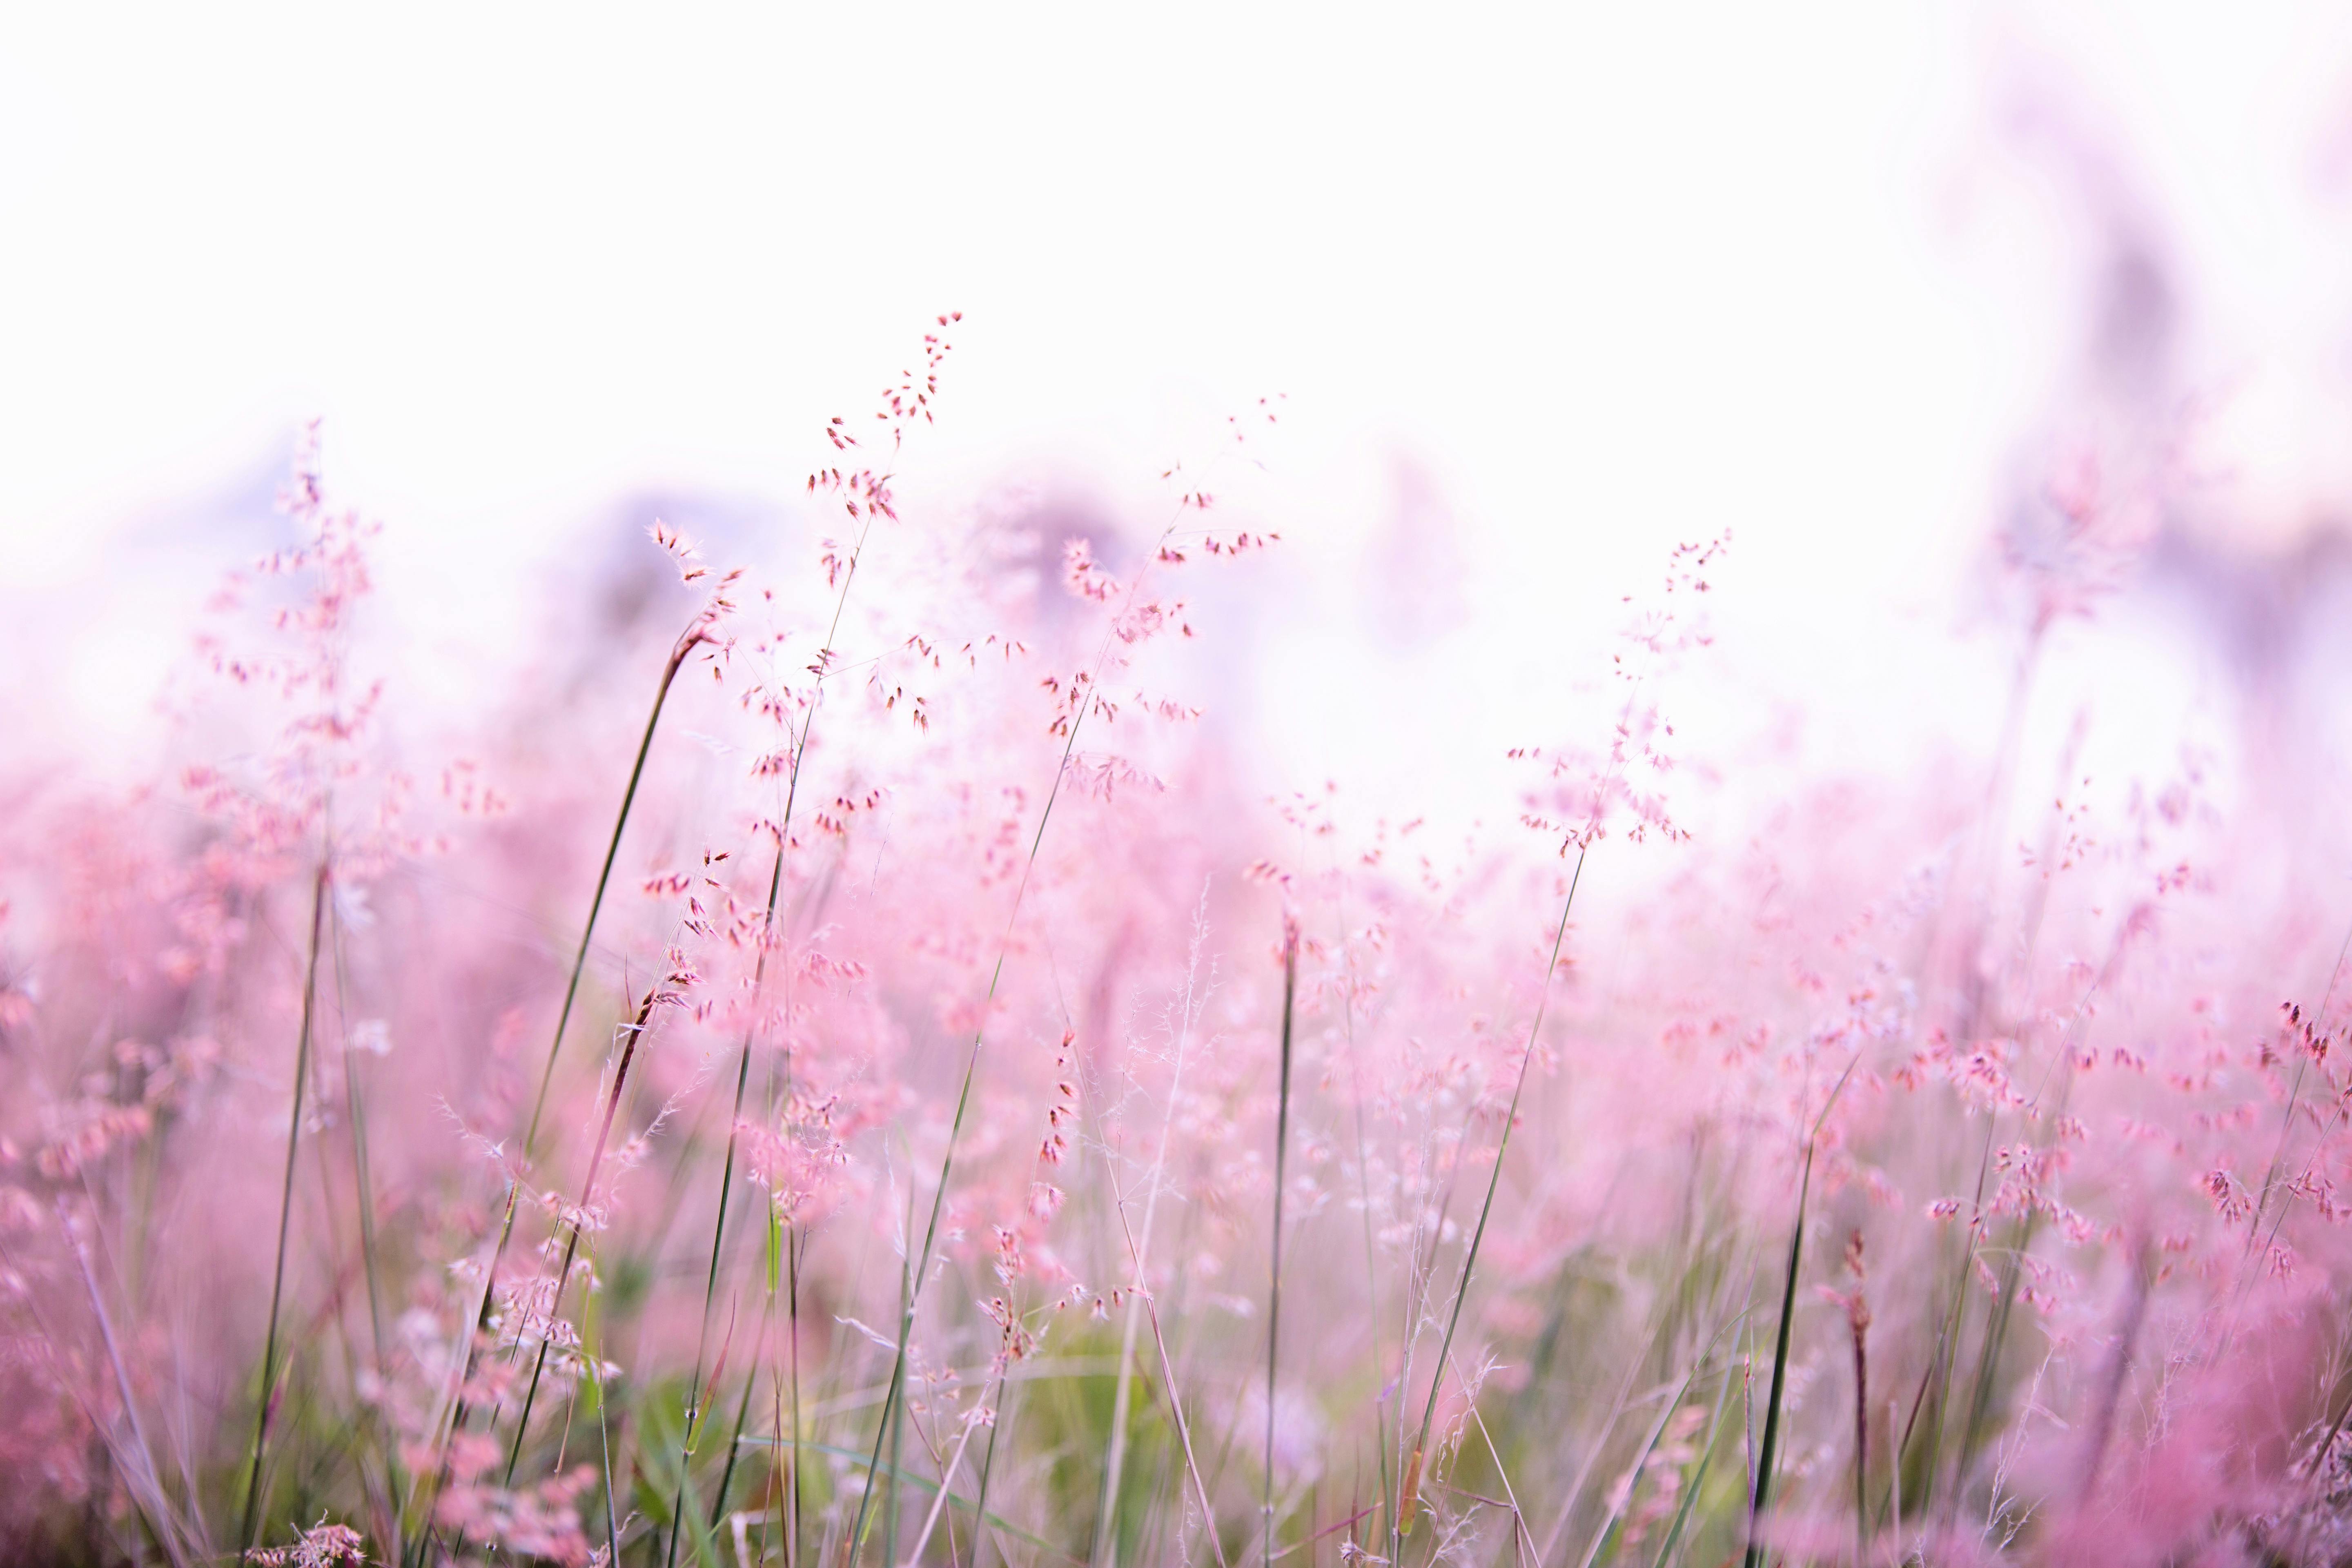 10,000+ Free Flower Field & Flowers Images - Pixabay